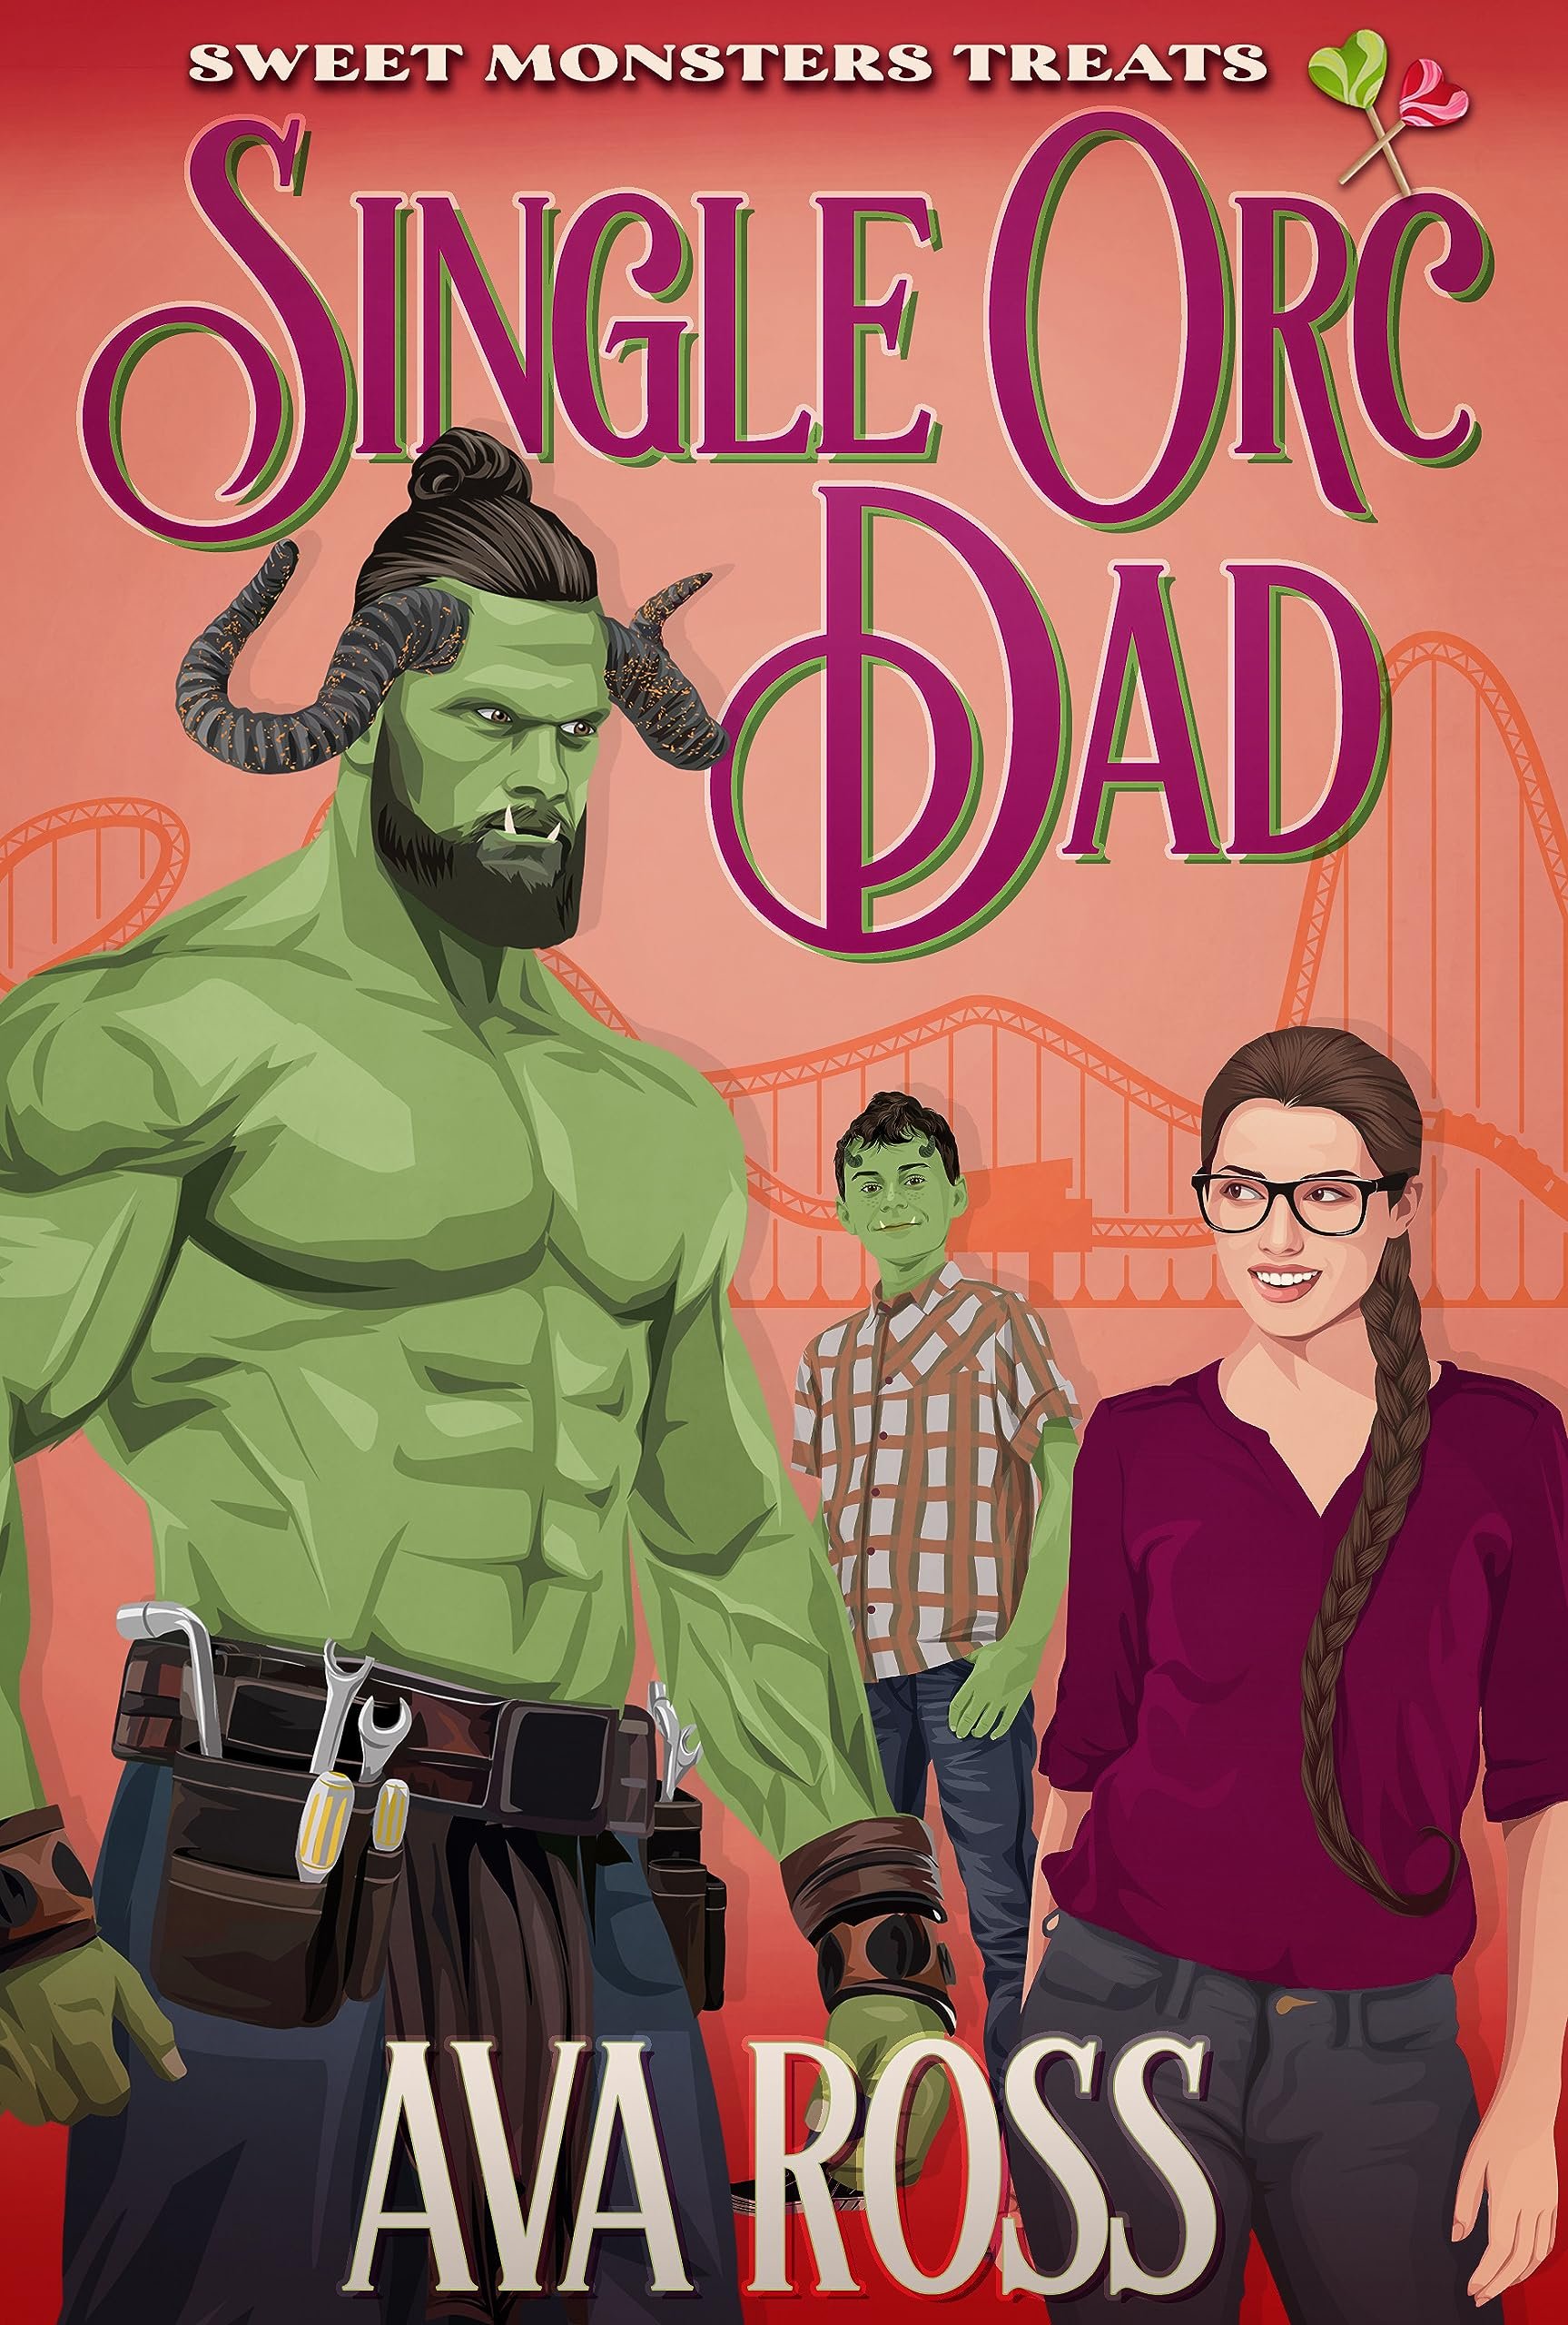 Single Orc Dad: Sweet Monster Treats Cover